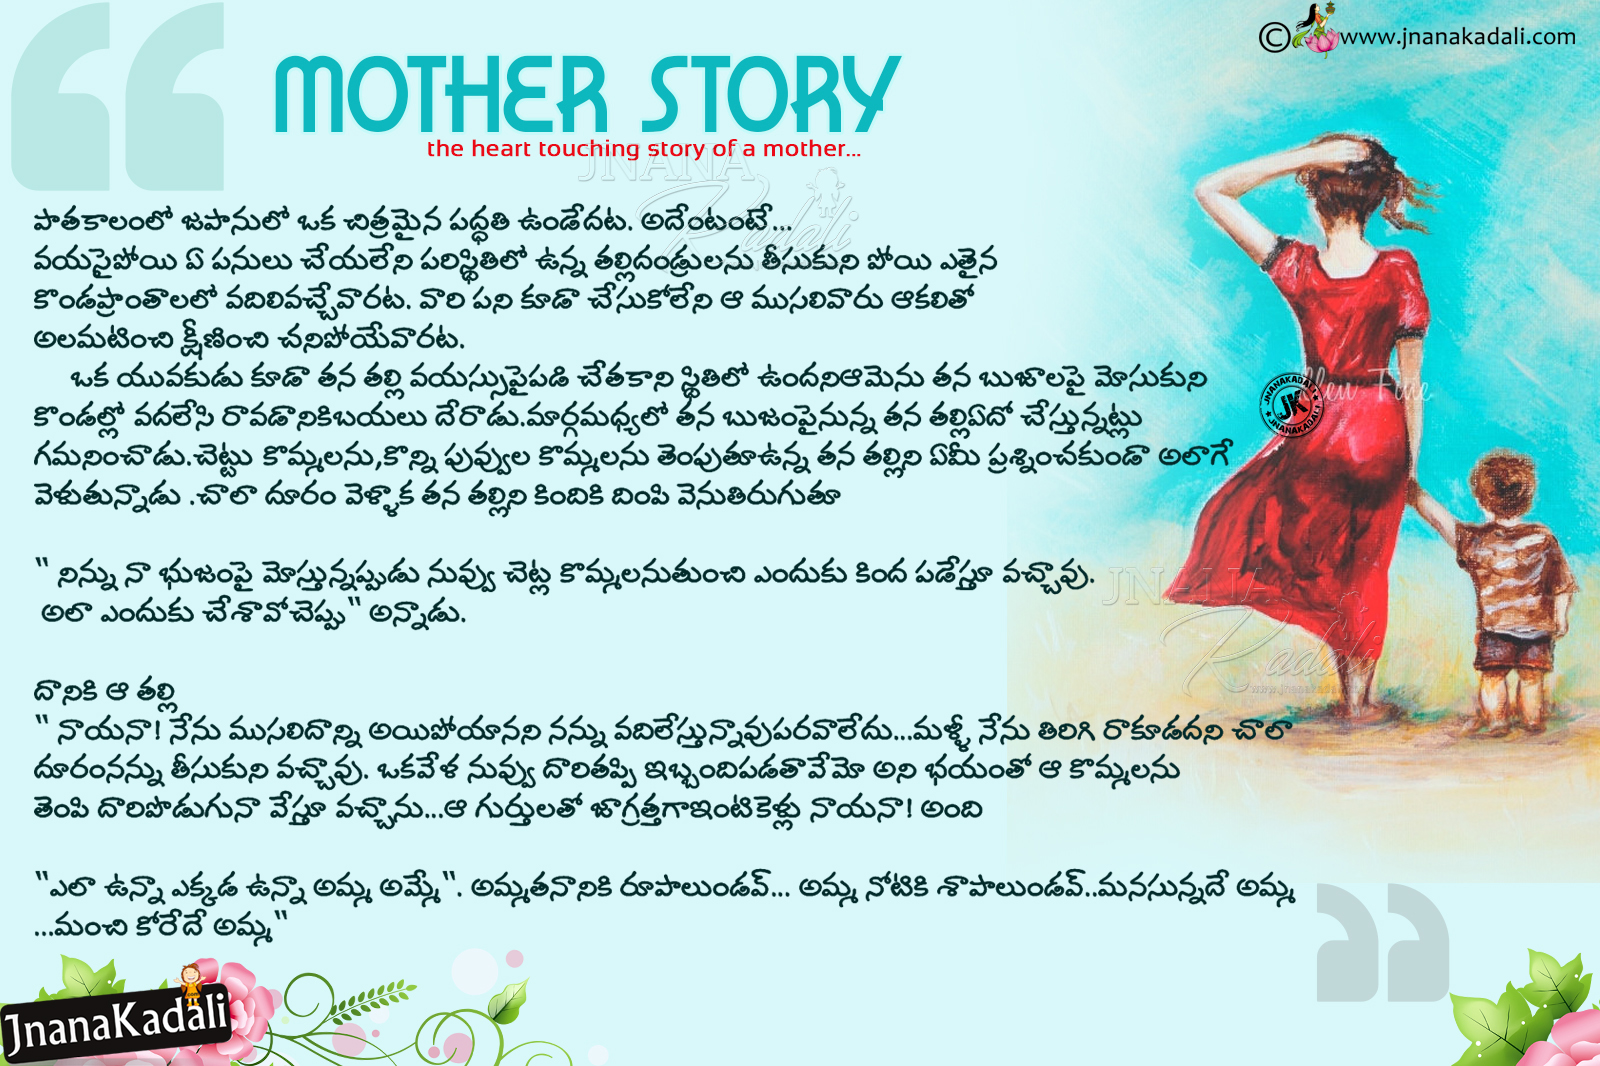 A Heart Touching story about Mother and her Importance in Everyone life